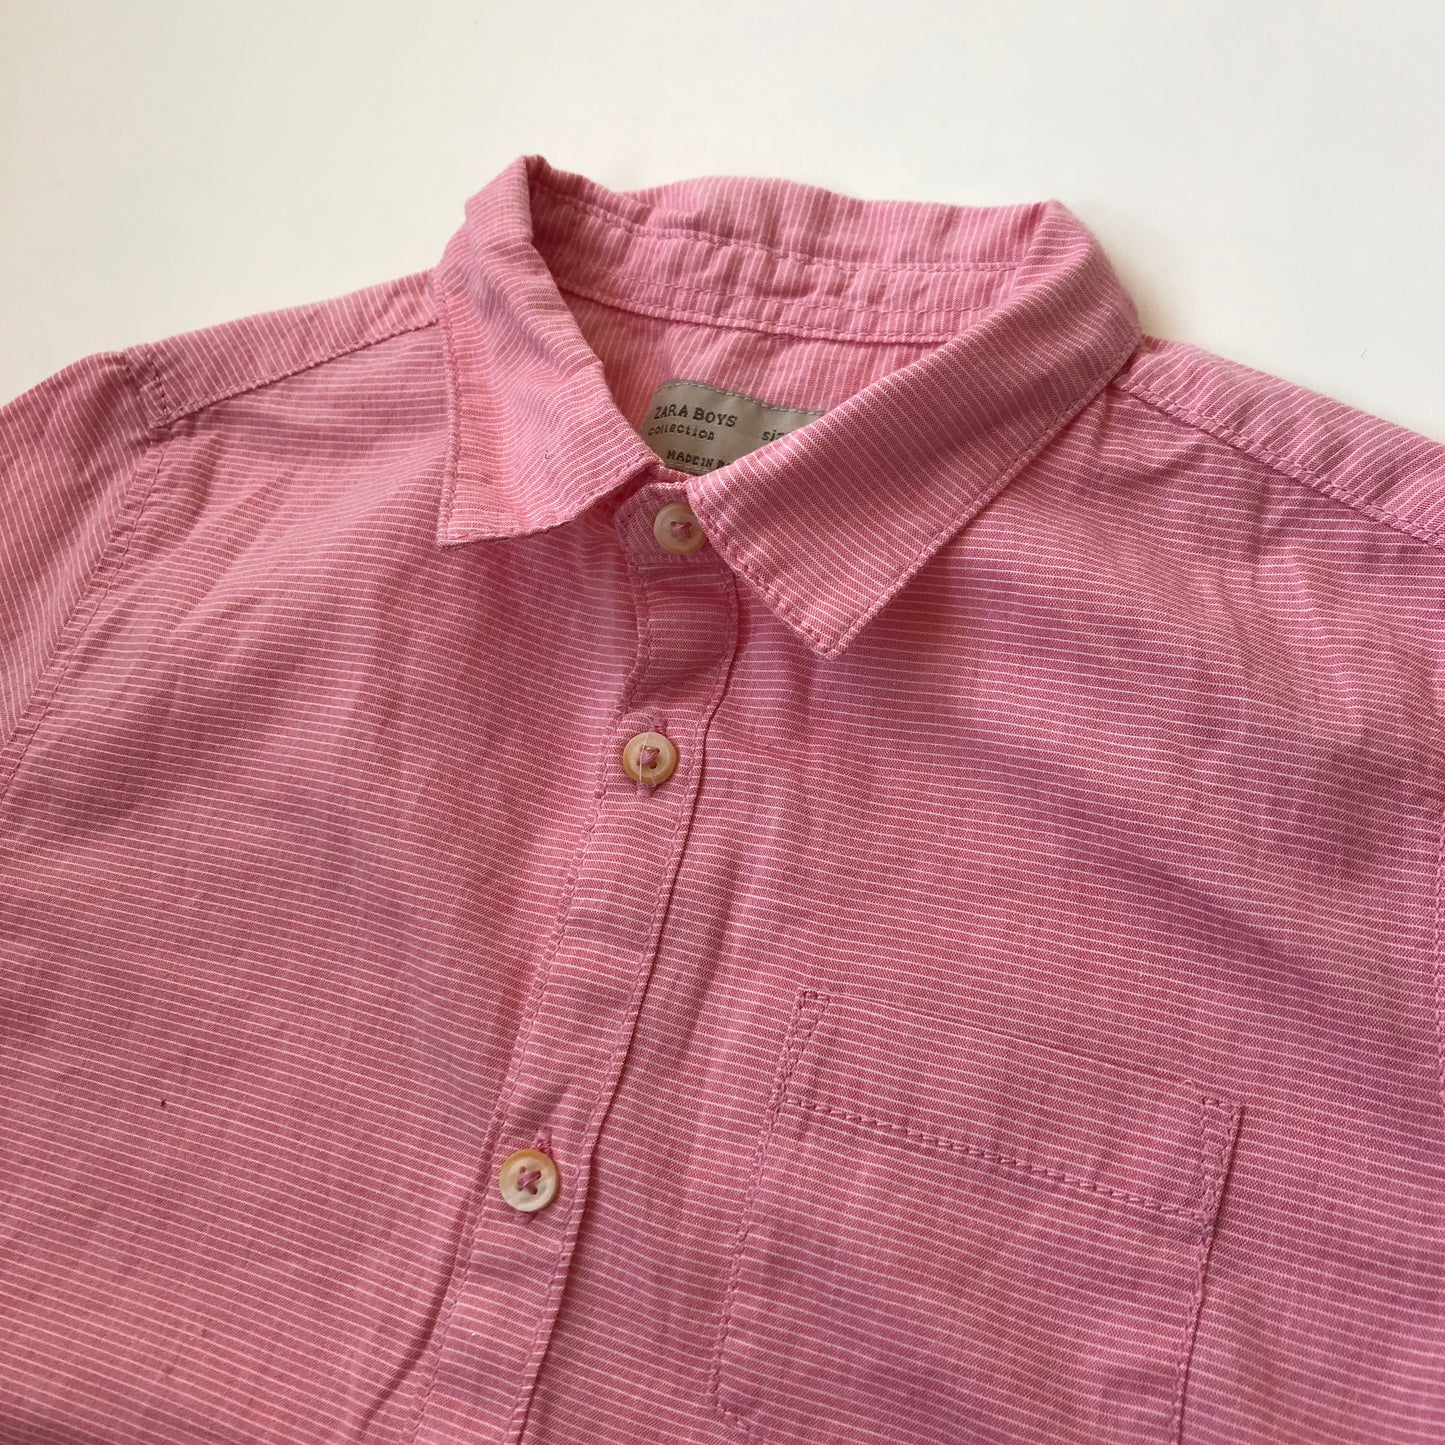 Shirt - Salmon Red - Age 6